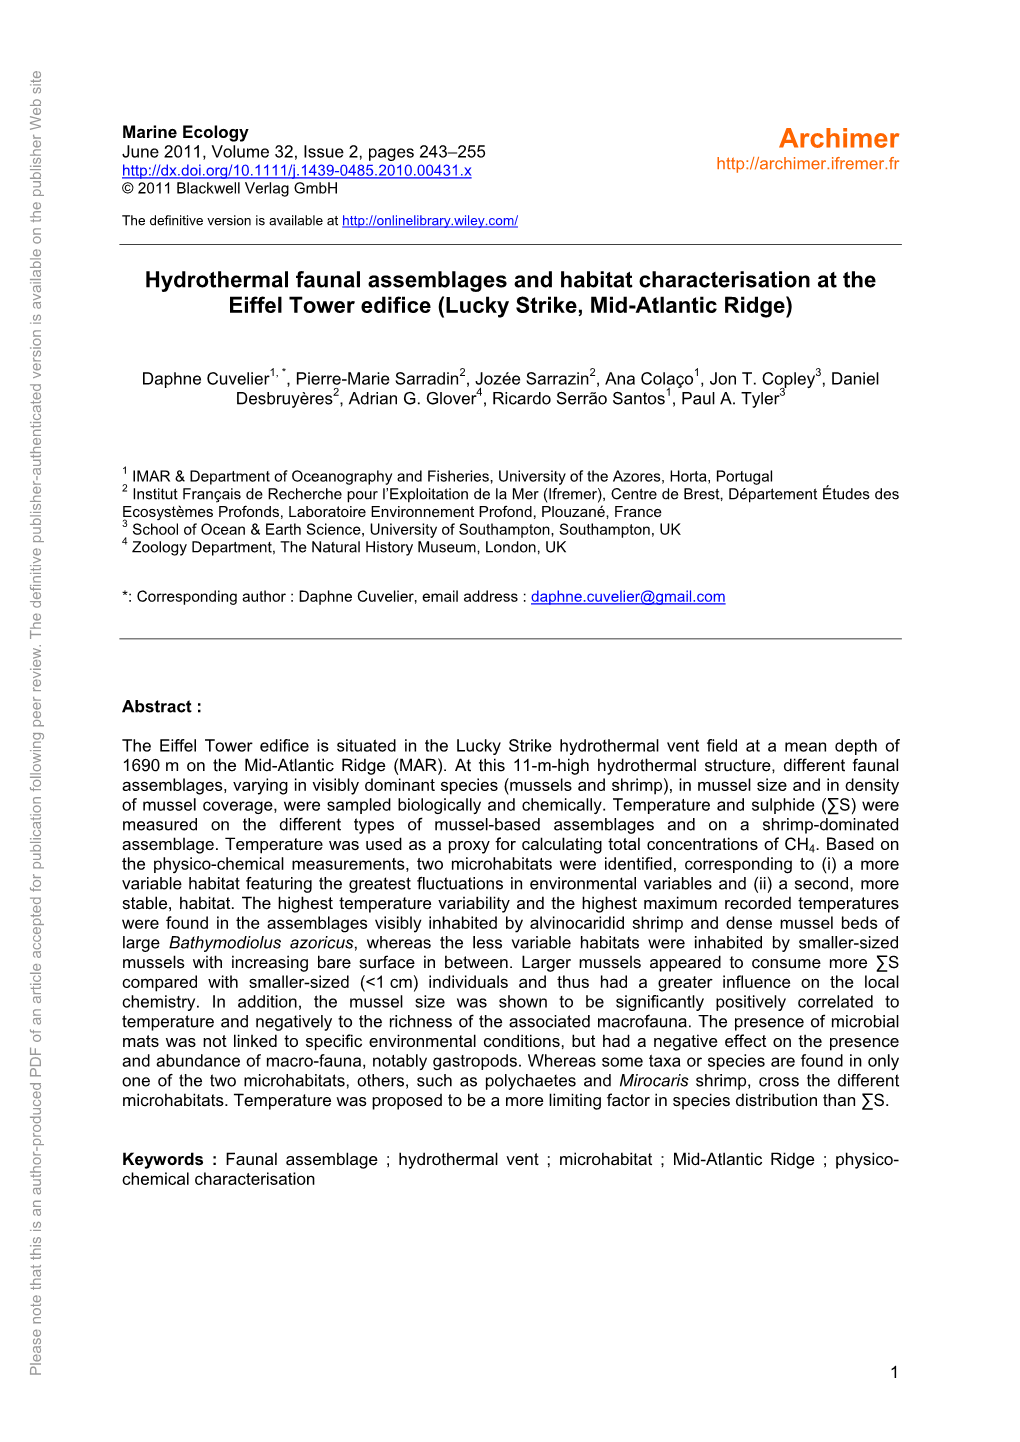 Hydrothermal Faunal Assemblages and Habitat Characterisation at The